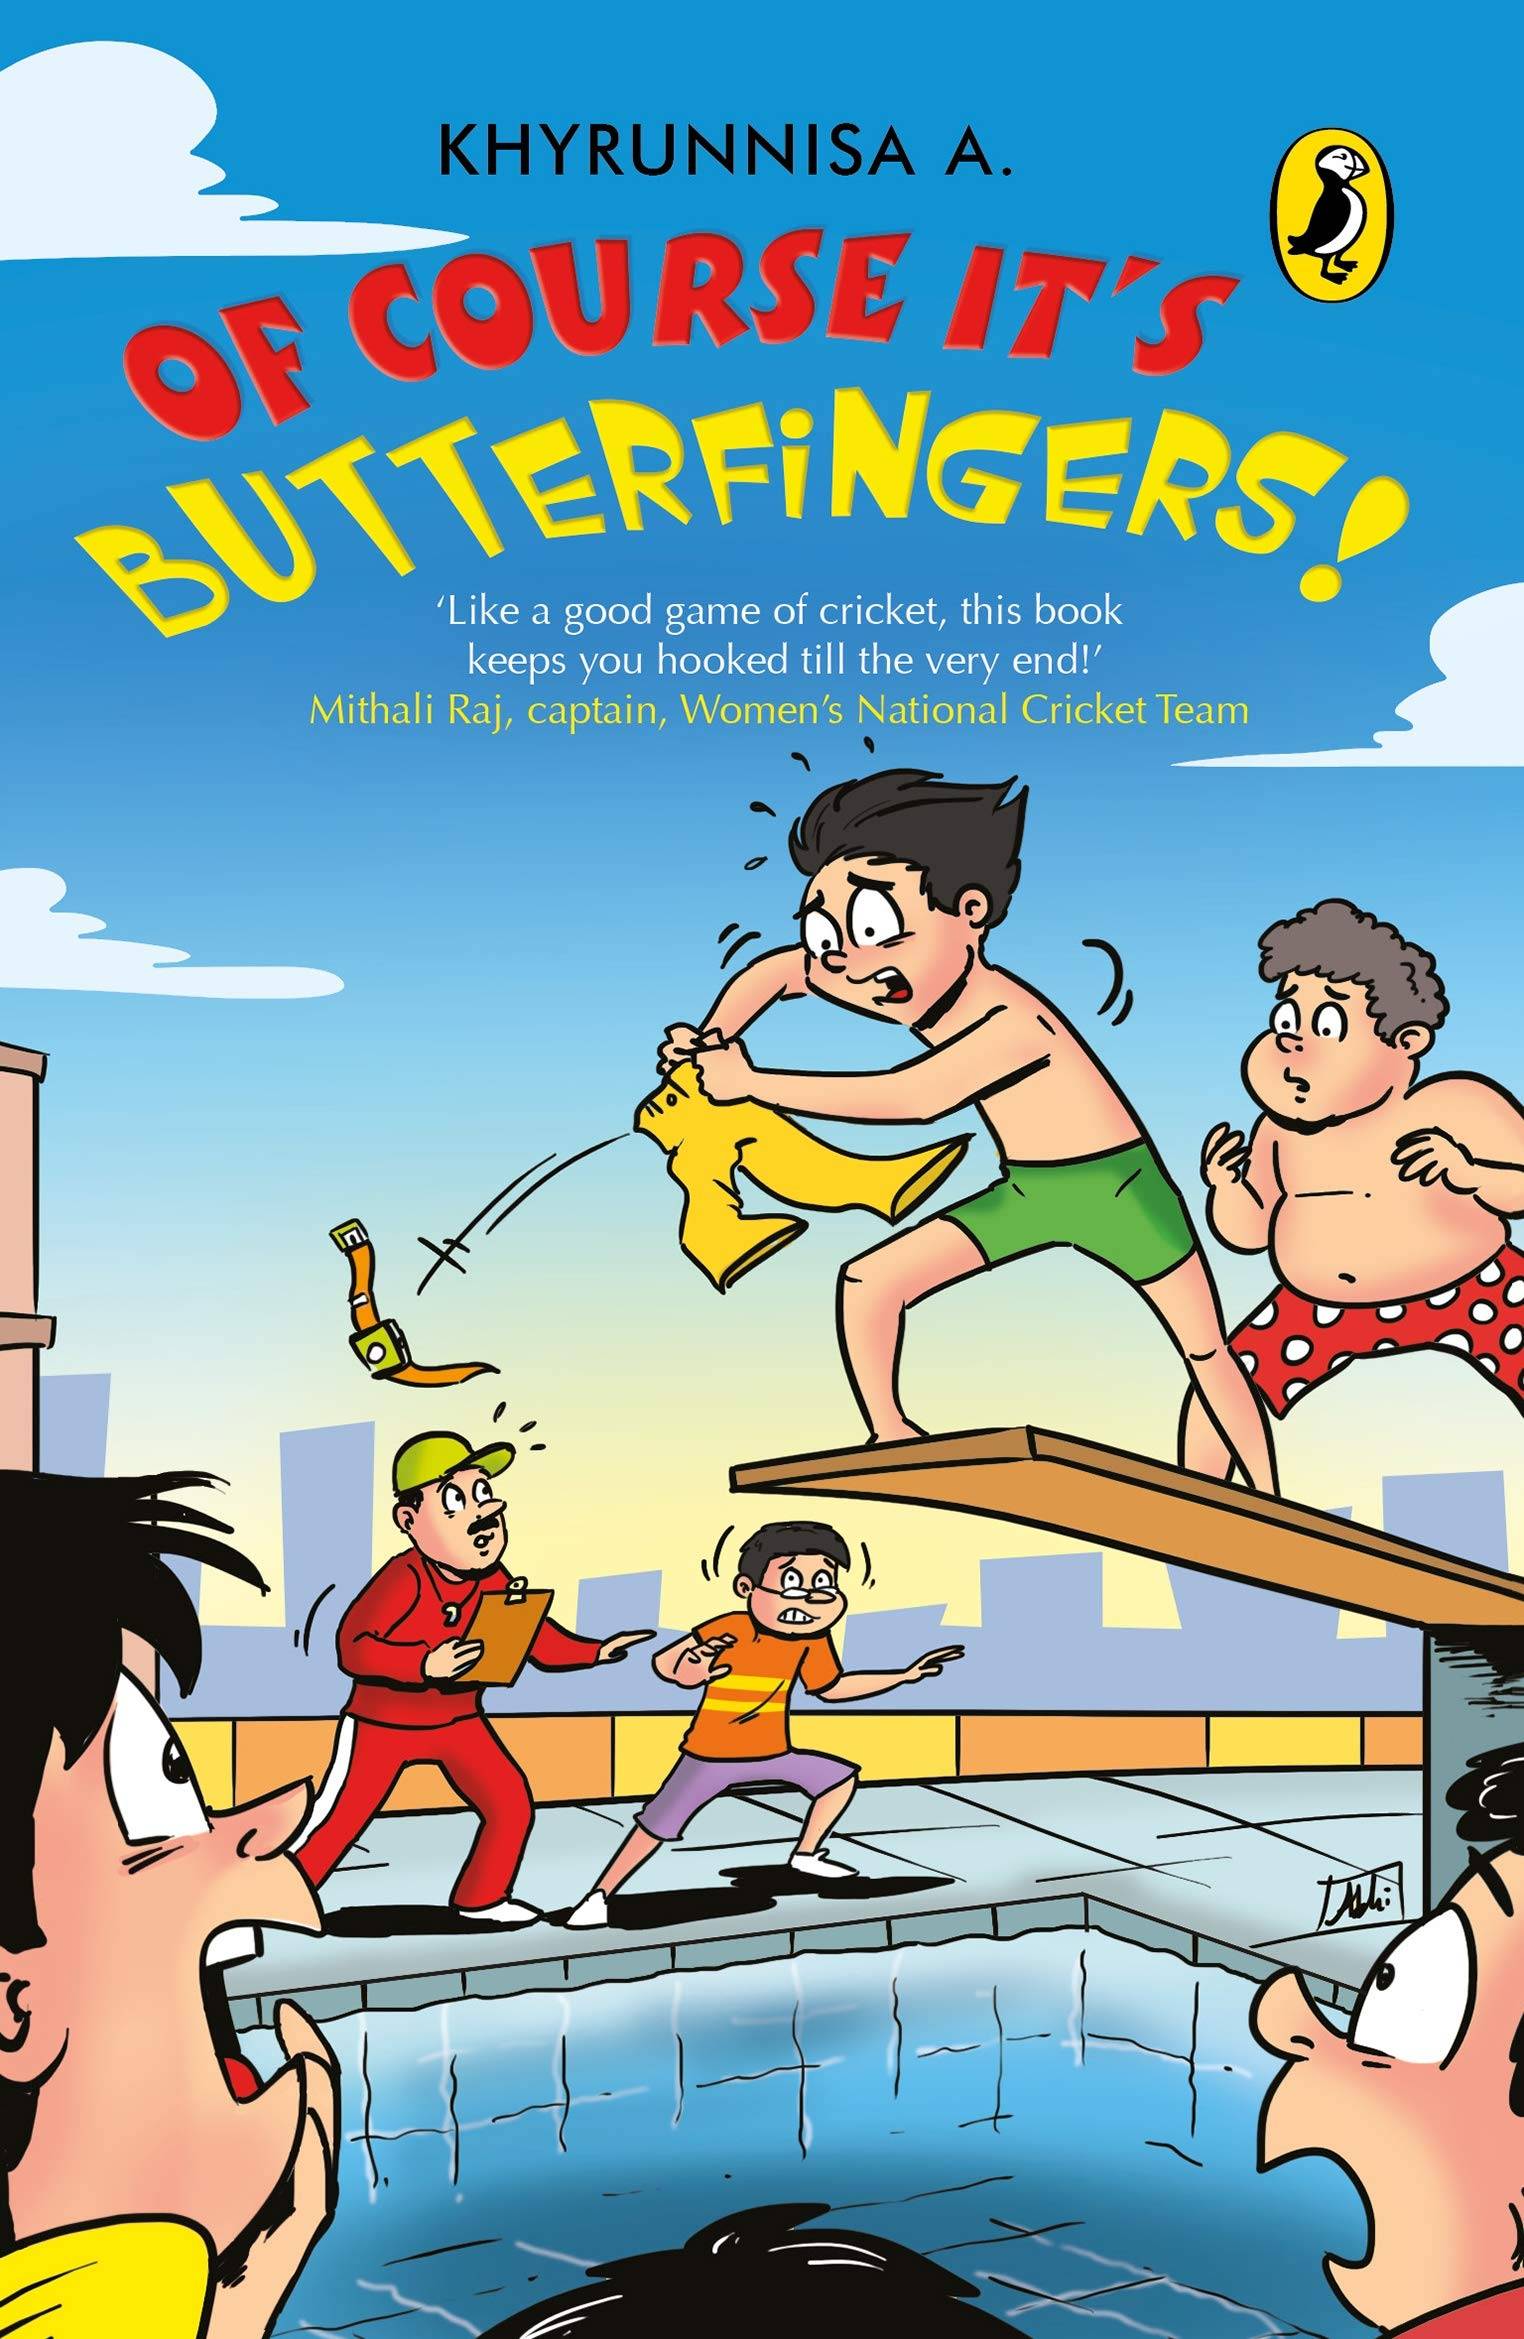 IMG : Ofcourse its Butterfingers!